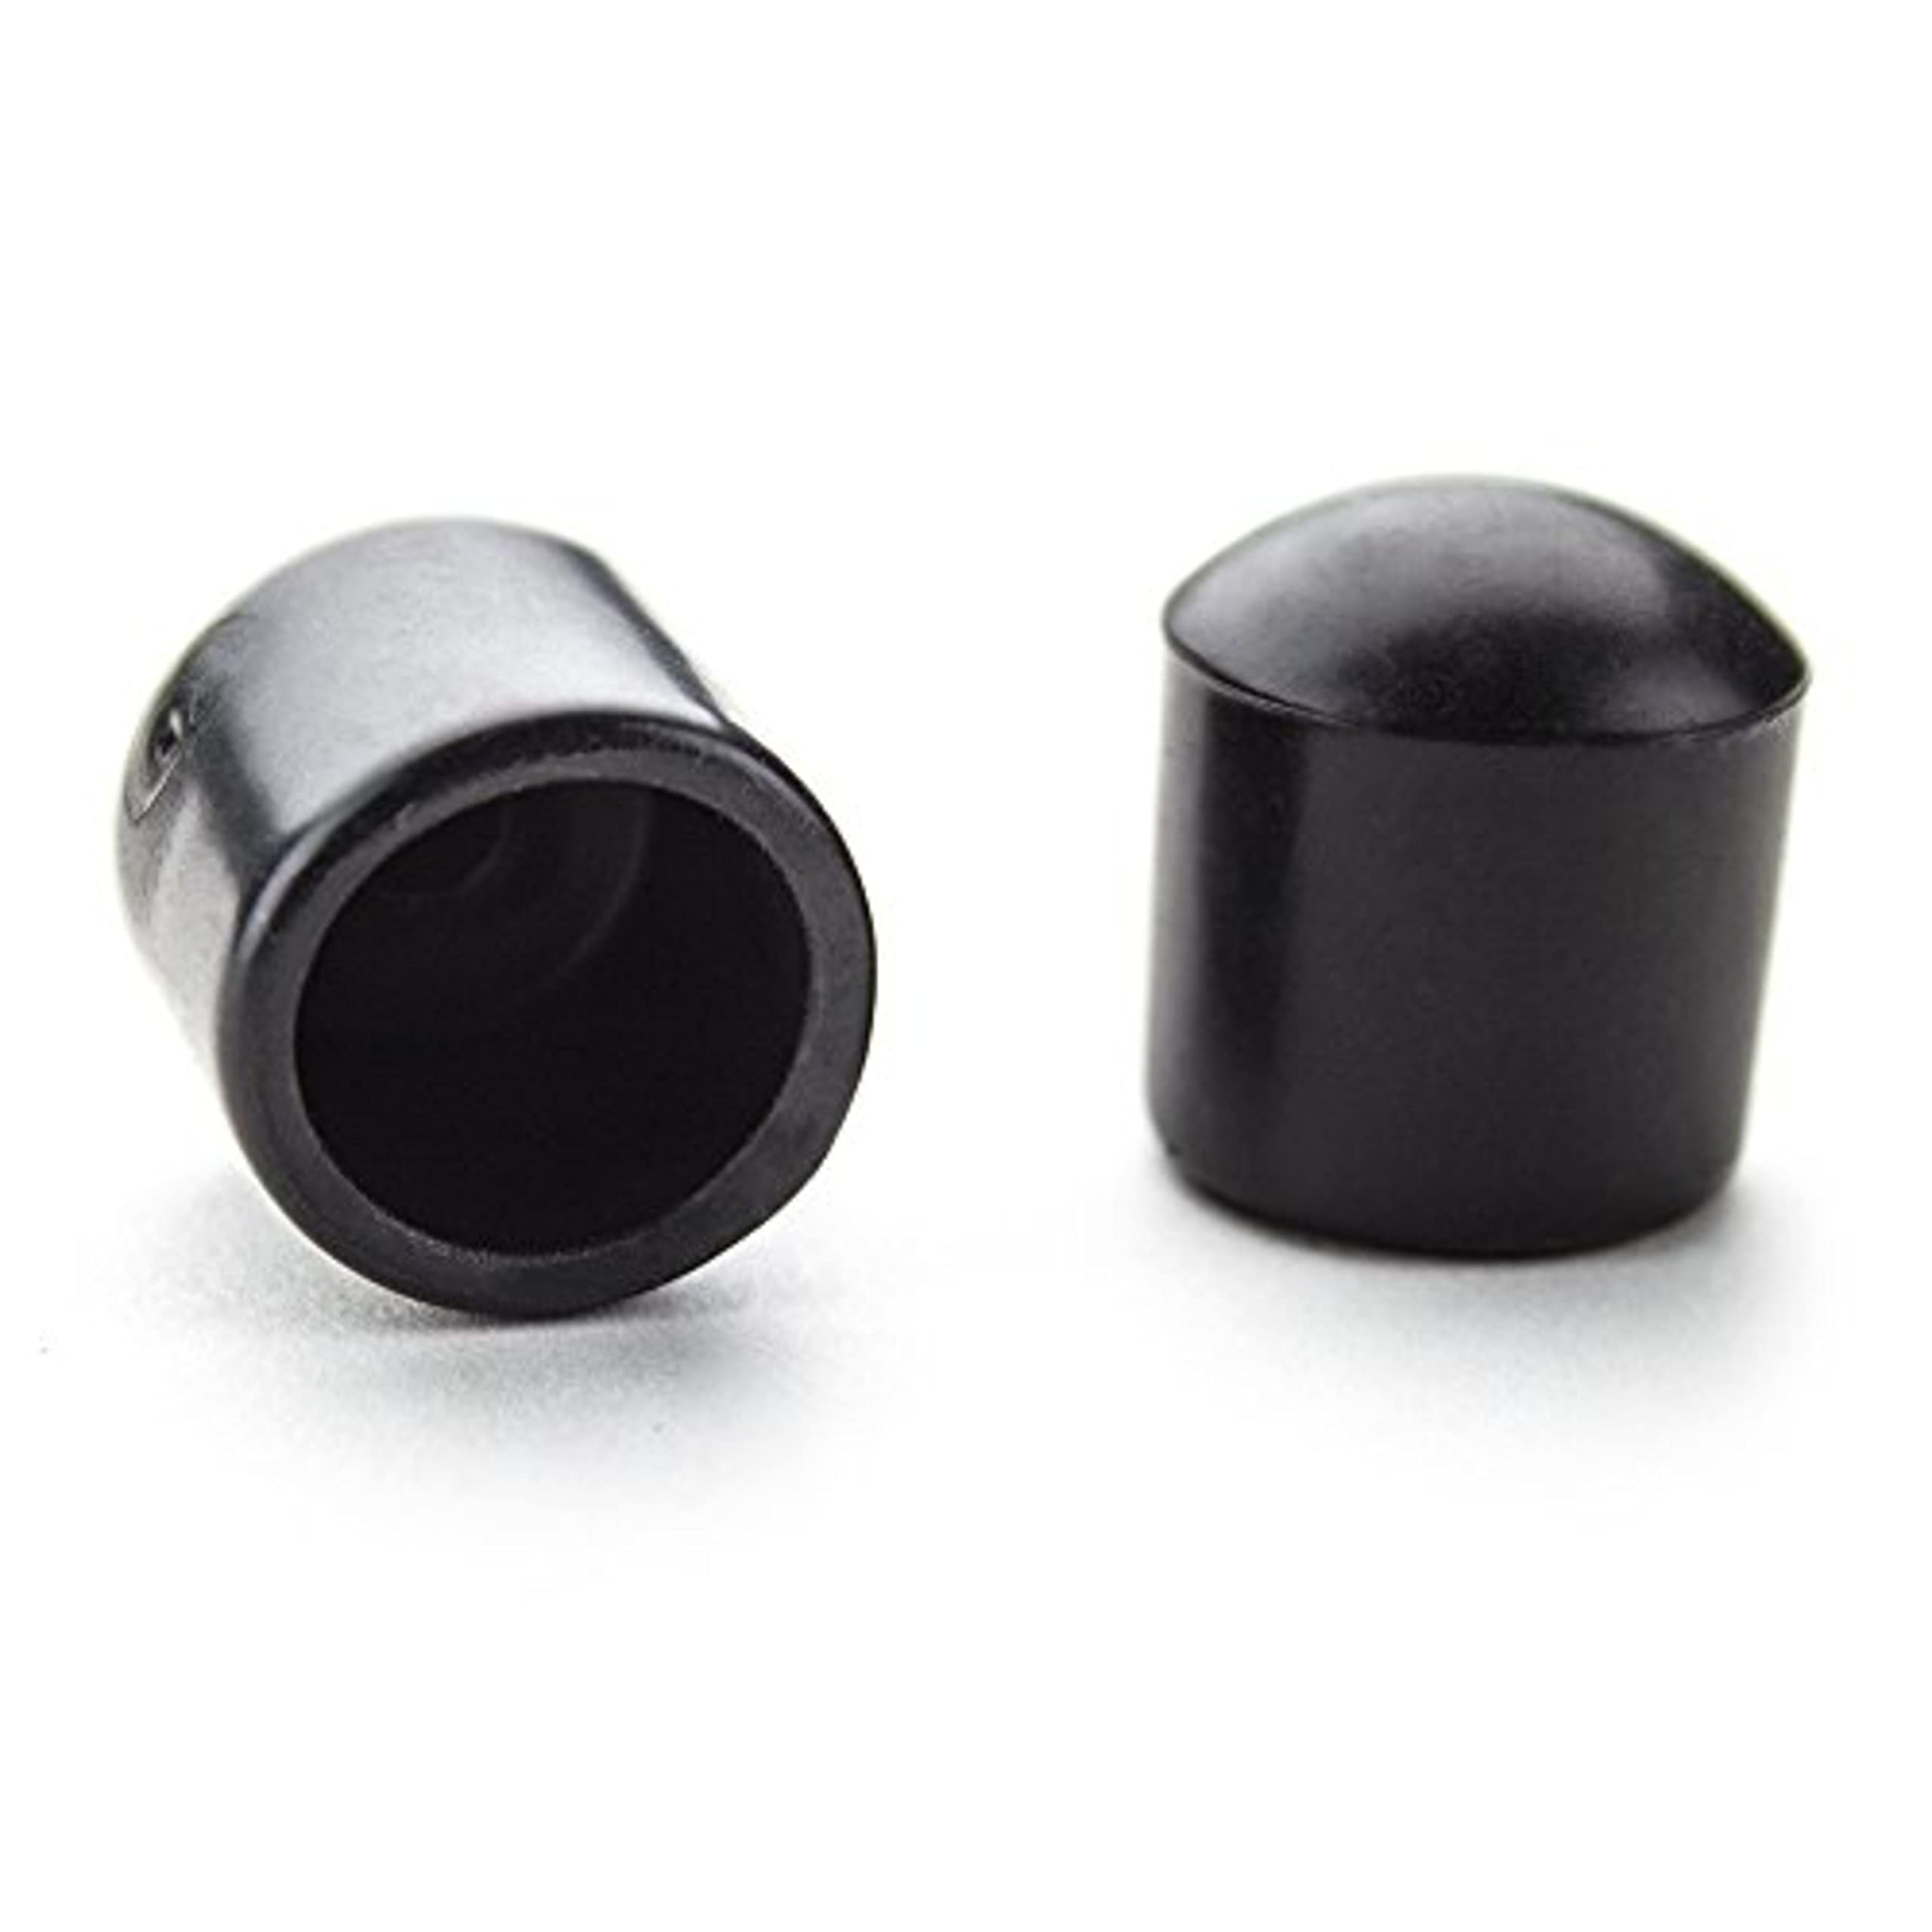 Brybelly Universal Safety End Caps for Standard Foosball Tables (Pack of 20)